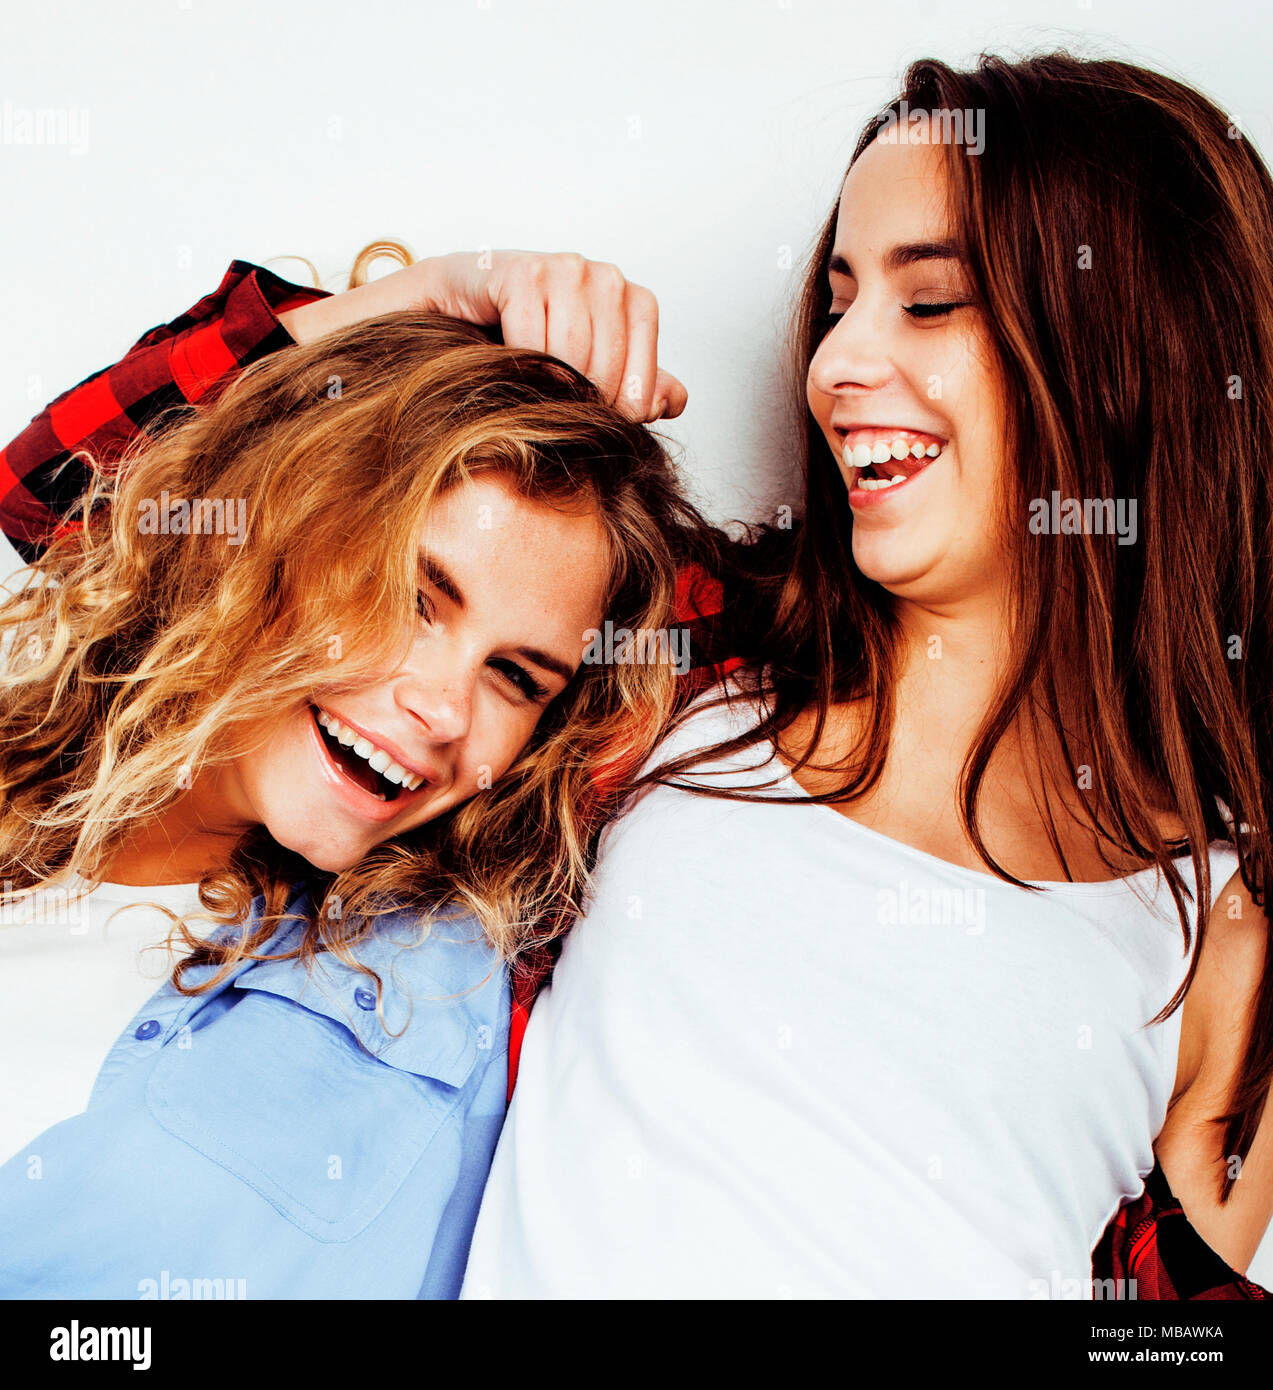 Best Friends Teenage Girl and Boy Together Having Fun, Posing Emotional on  White Background, Couple Happy Smiling Stock Photo - Image of latin, hair:  214349284